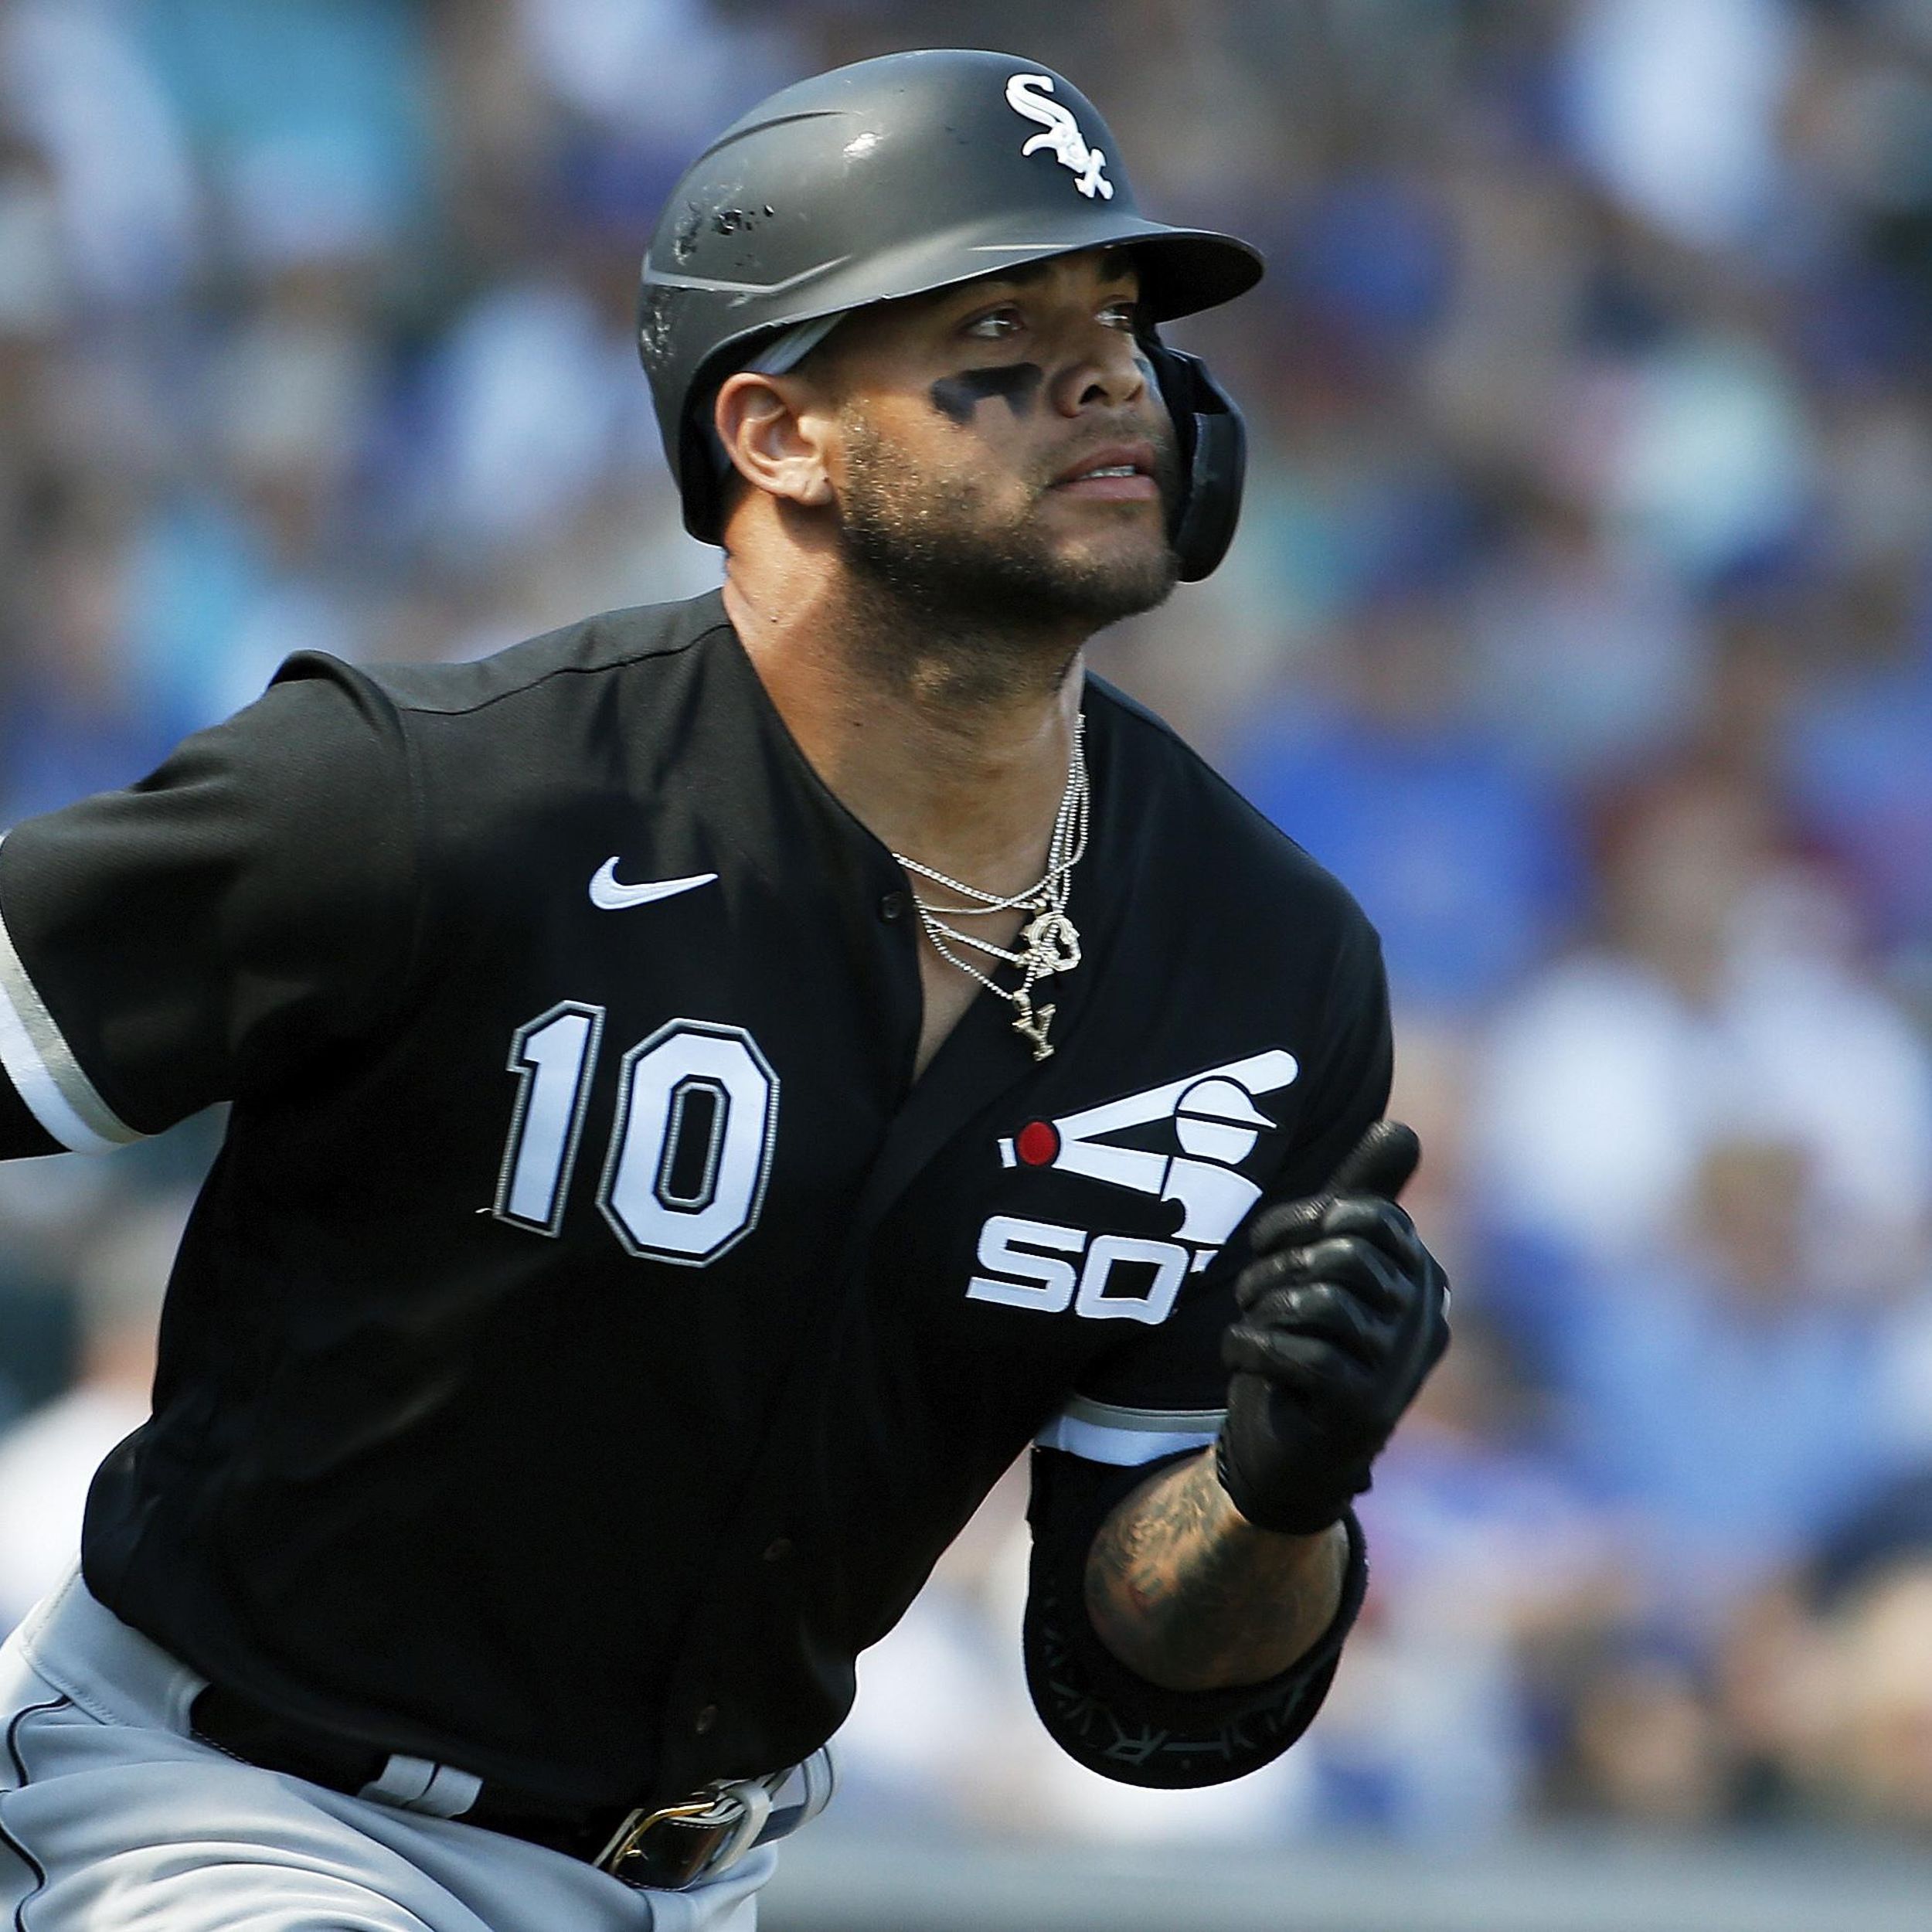 White Sox announce $70M, 5-year deal with Yoan Moncada